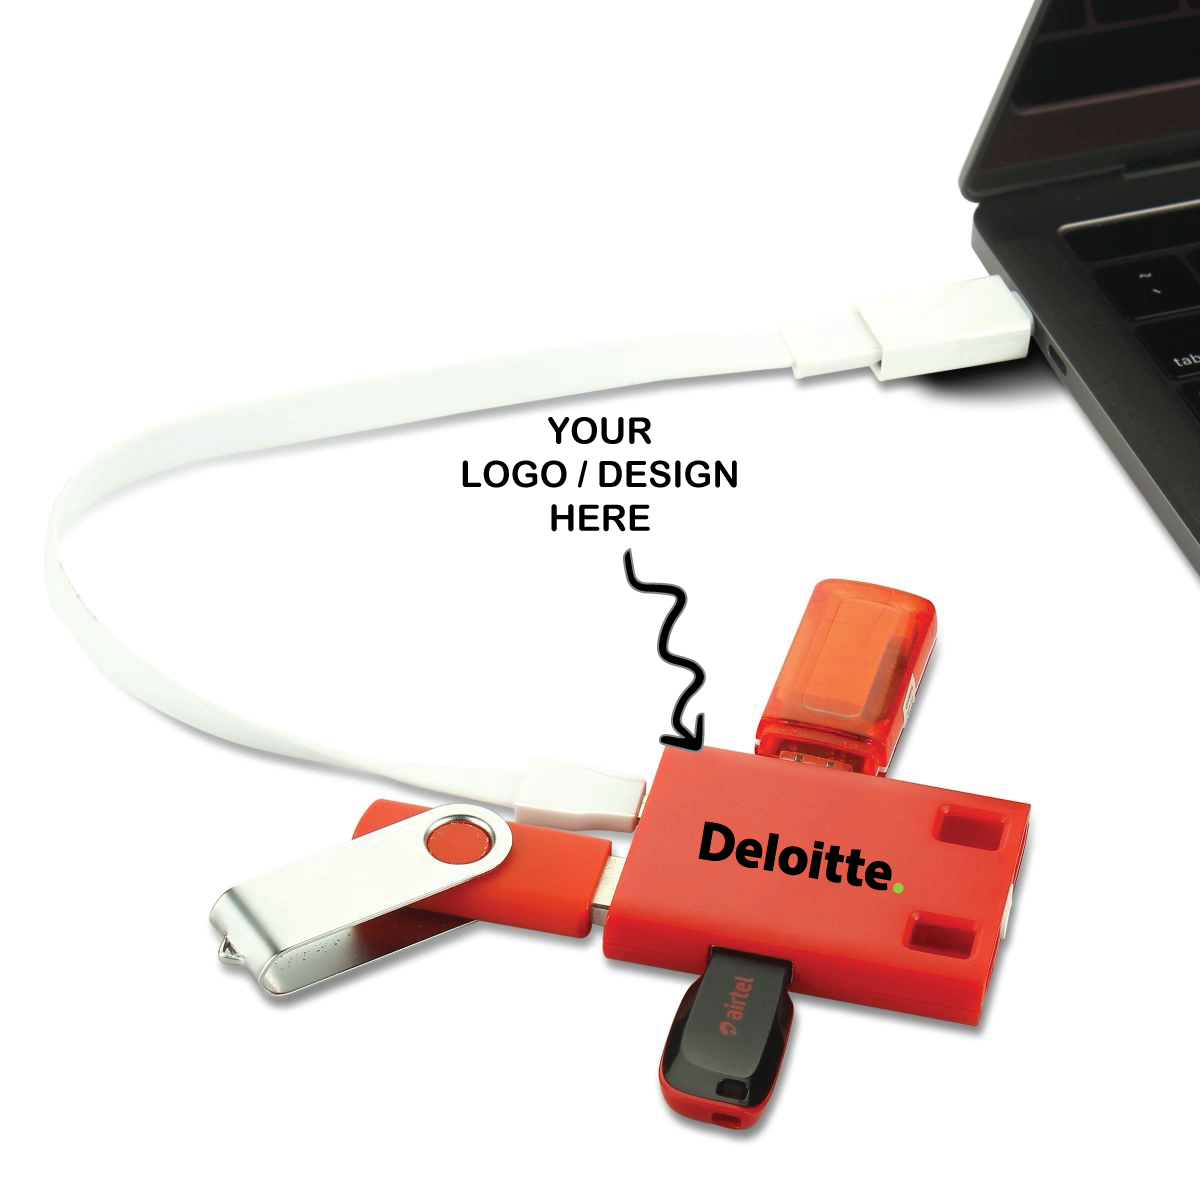 3 Port USB Hub Extension Cable - for Promotions, Giveaway, Event Freebies, Corporate, and Personal Gifting BGC101